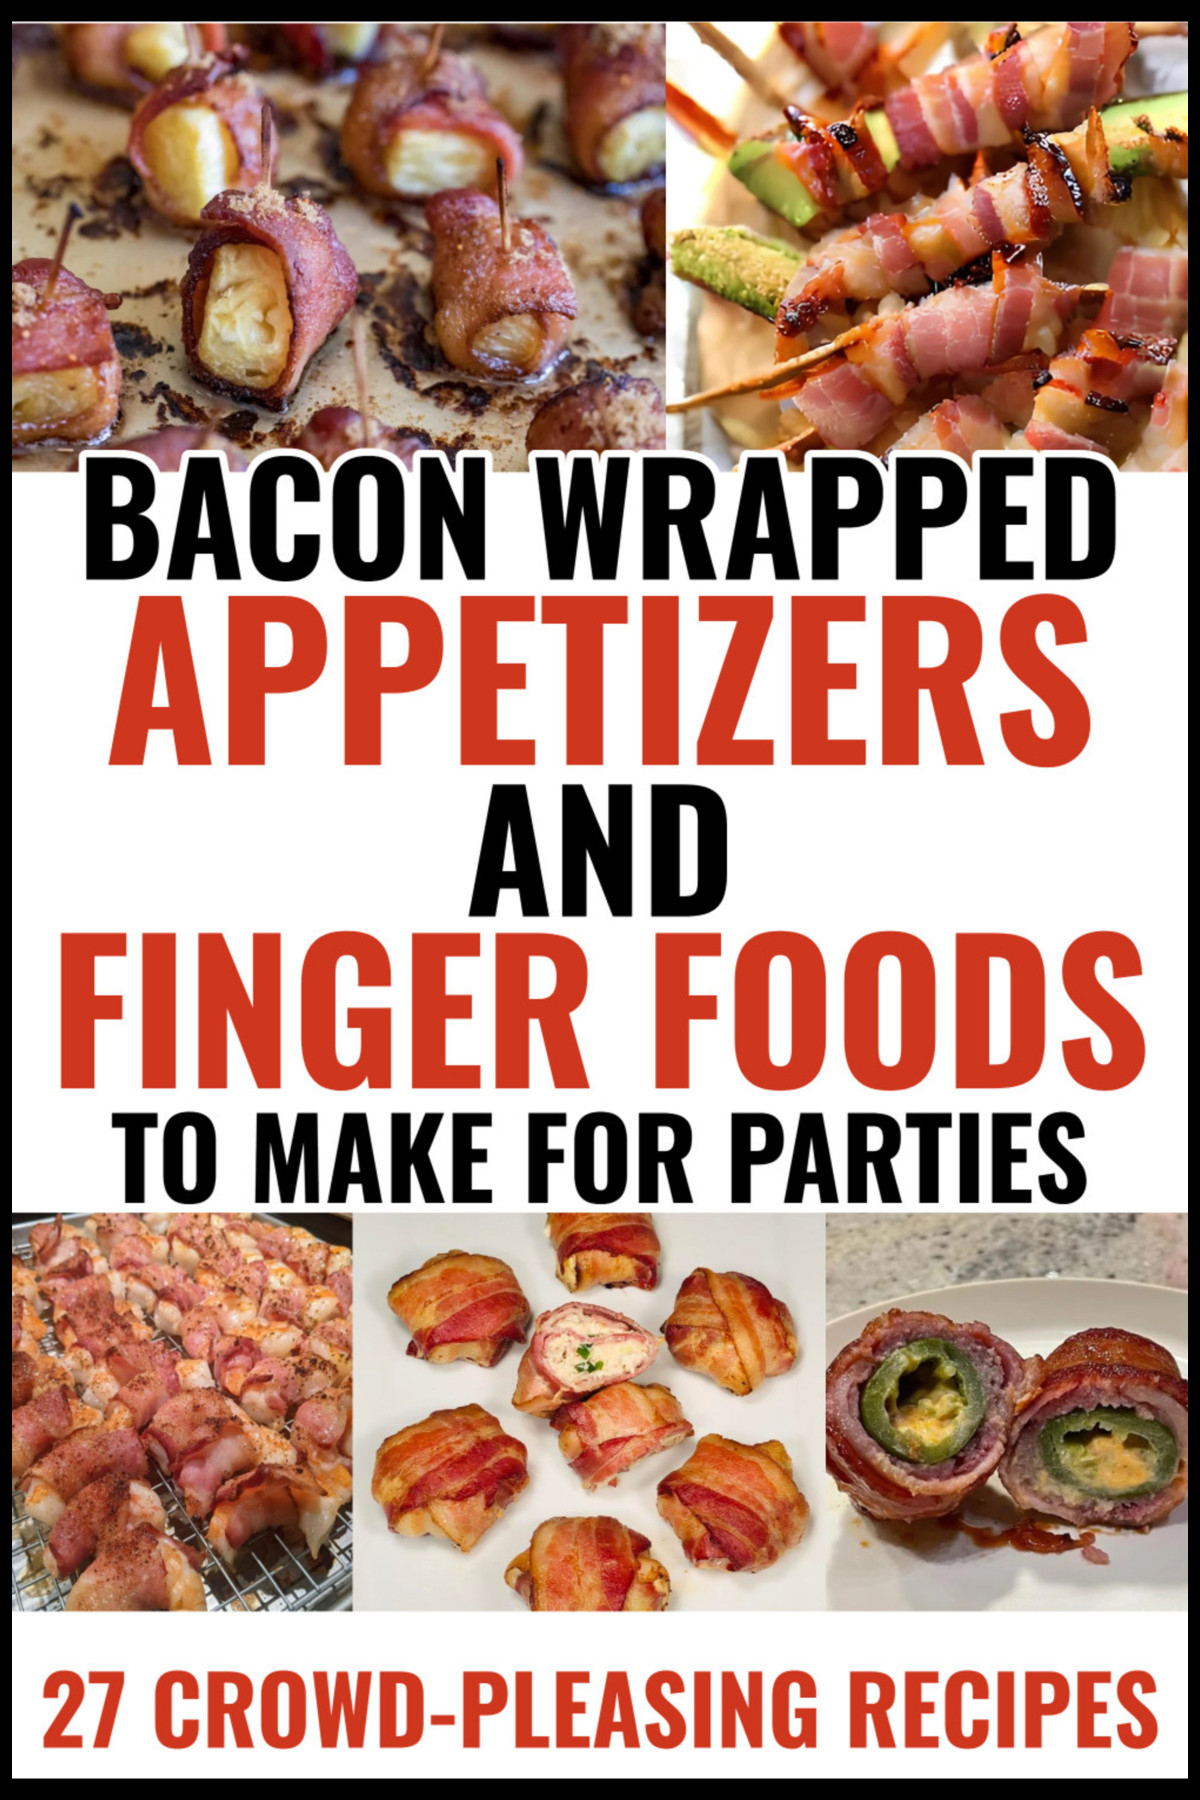 Easy bacon wrapped appetizers recipes ideas for parties